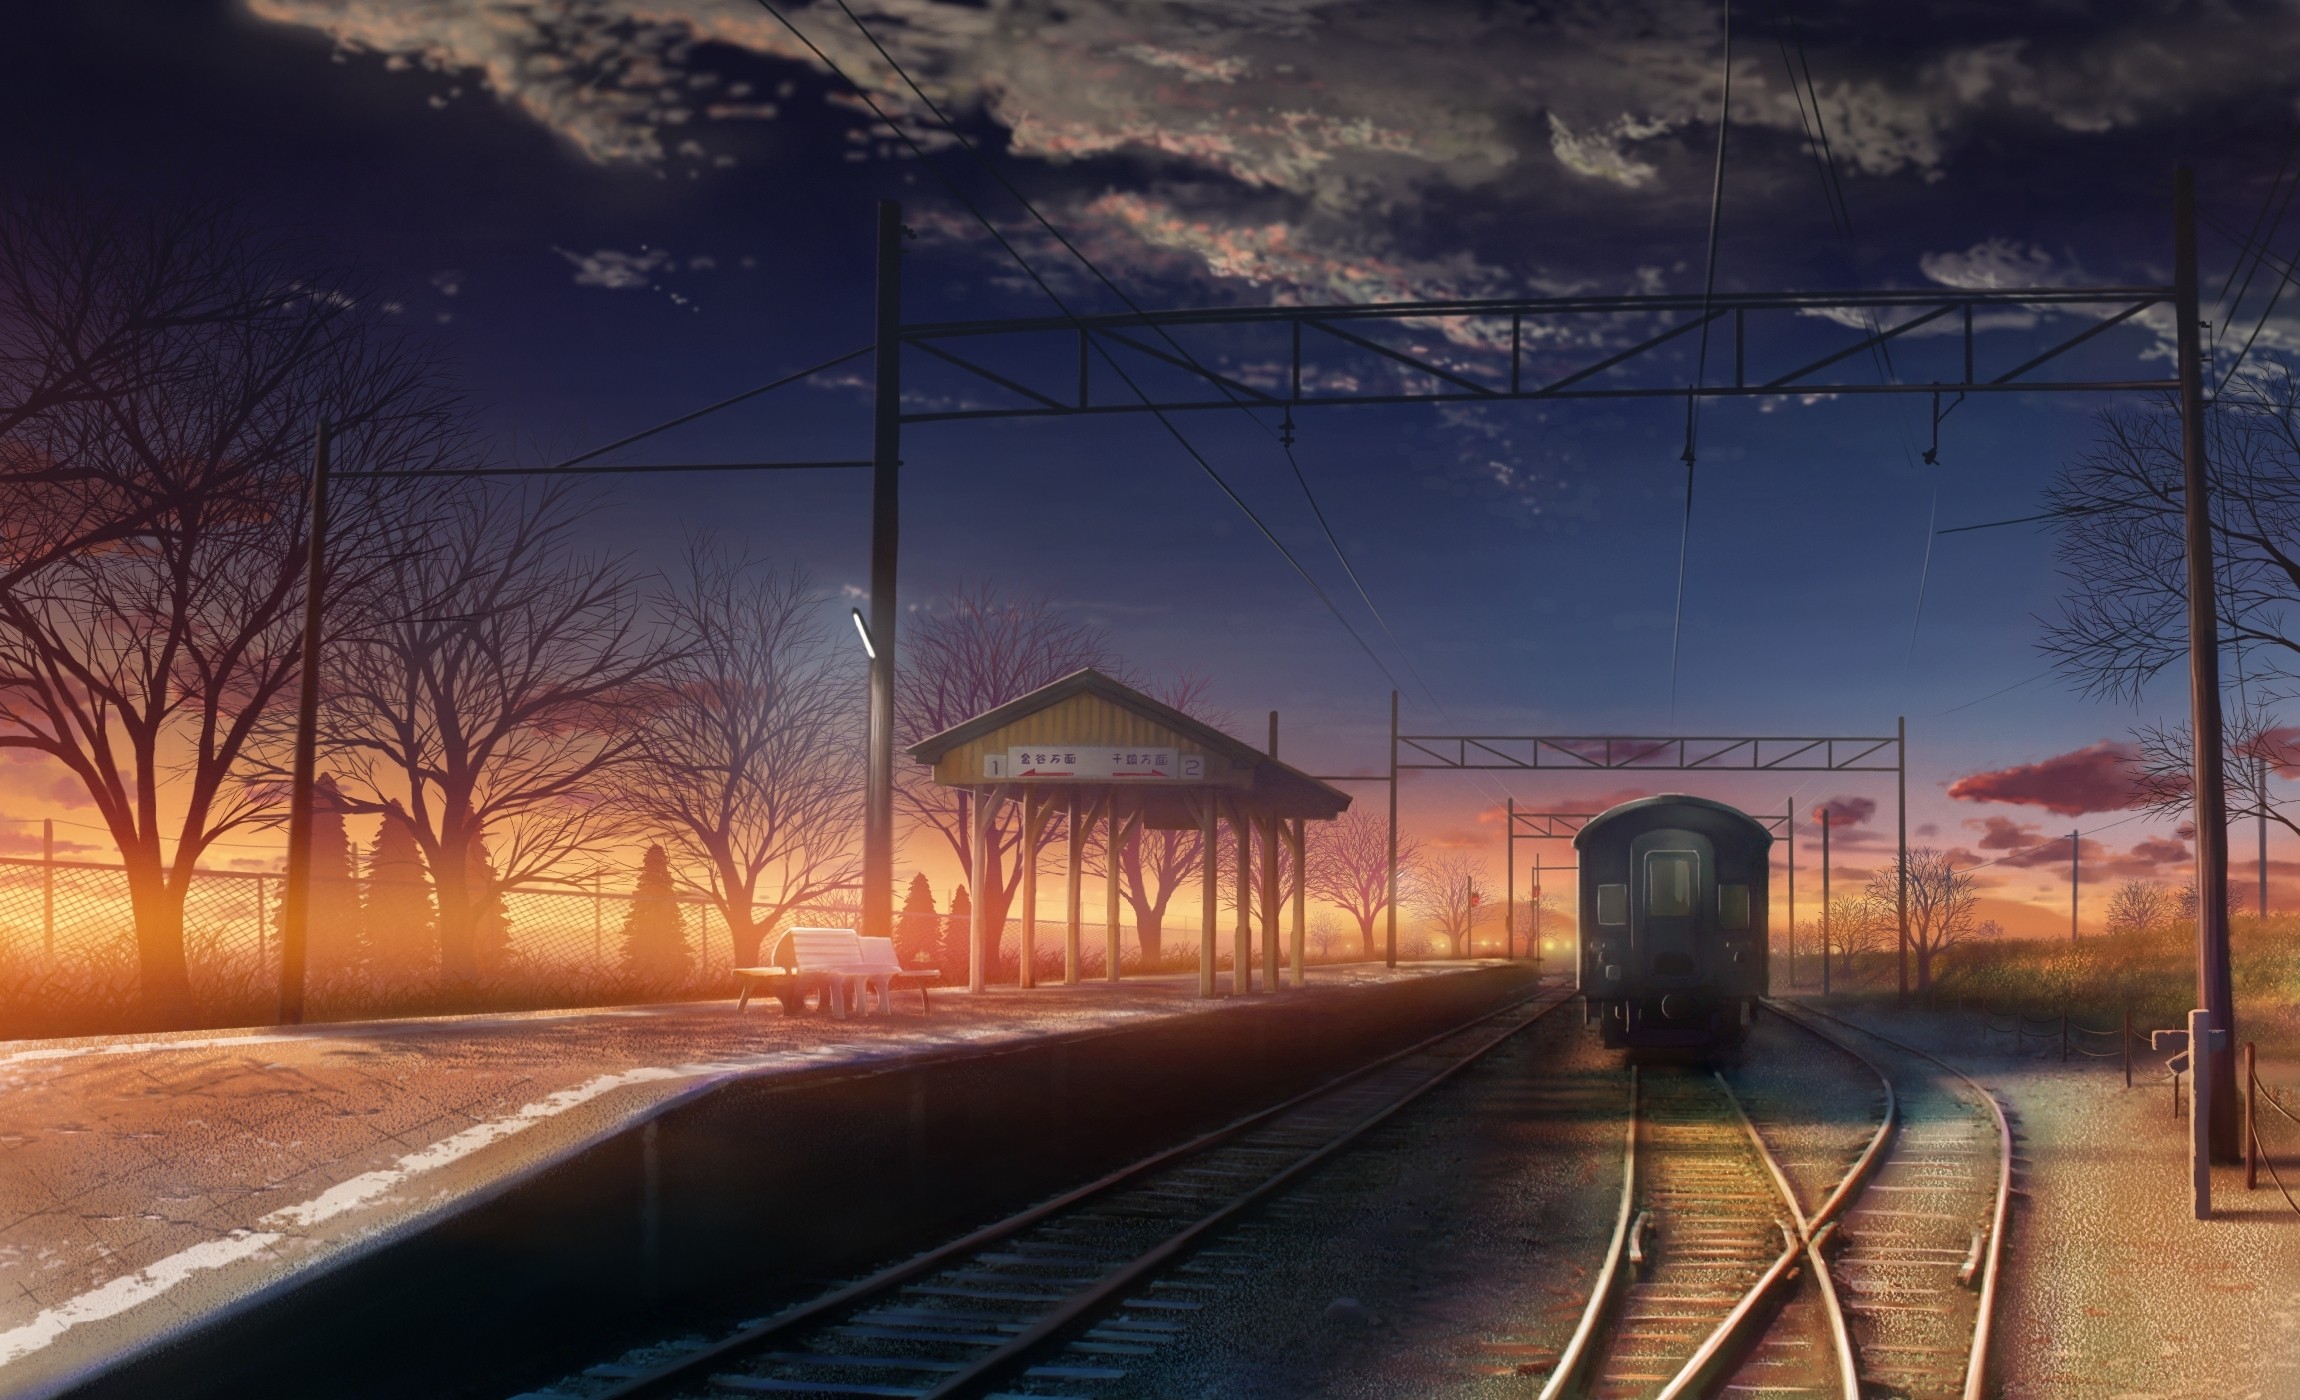 Clouds Landscapes Station Trains Makoto Shinkai Train Stations Scenic 5 Centimeters Per Second Drawings Anime Wallpapers Hd Desktop And Mobile Backgrounds